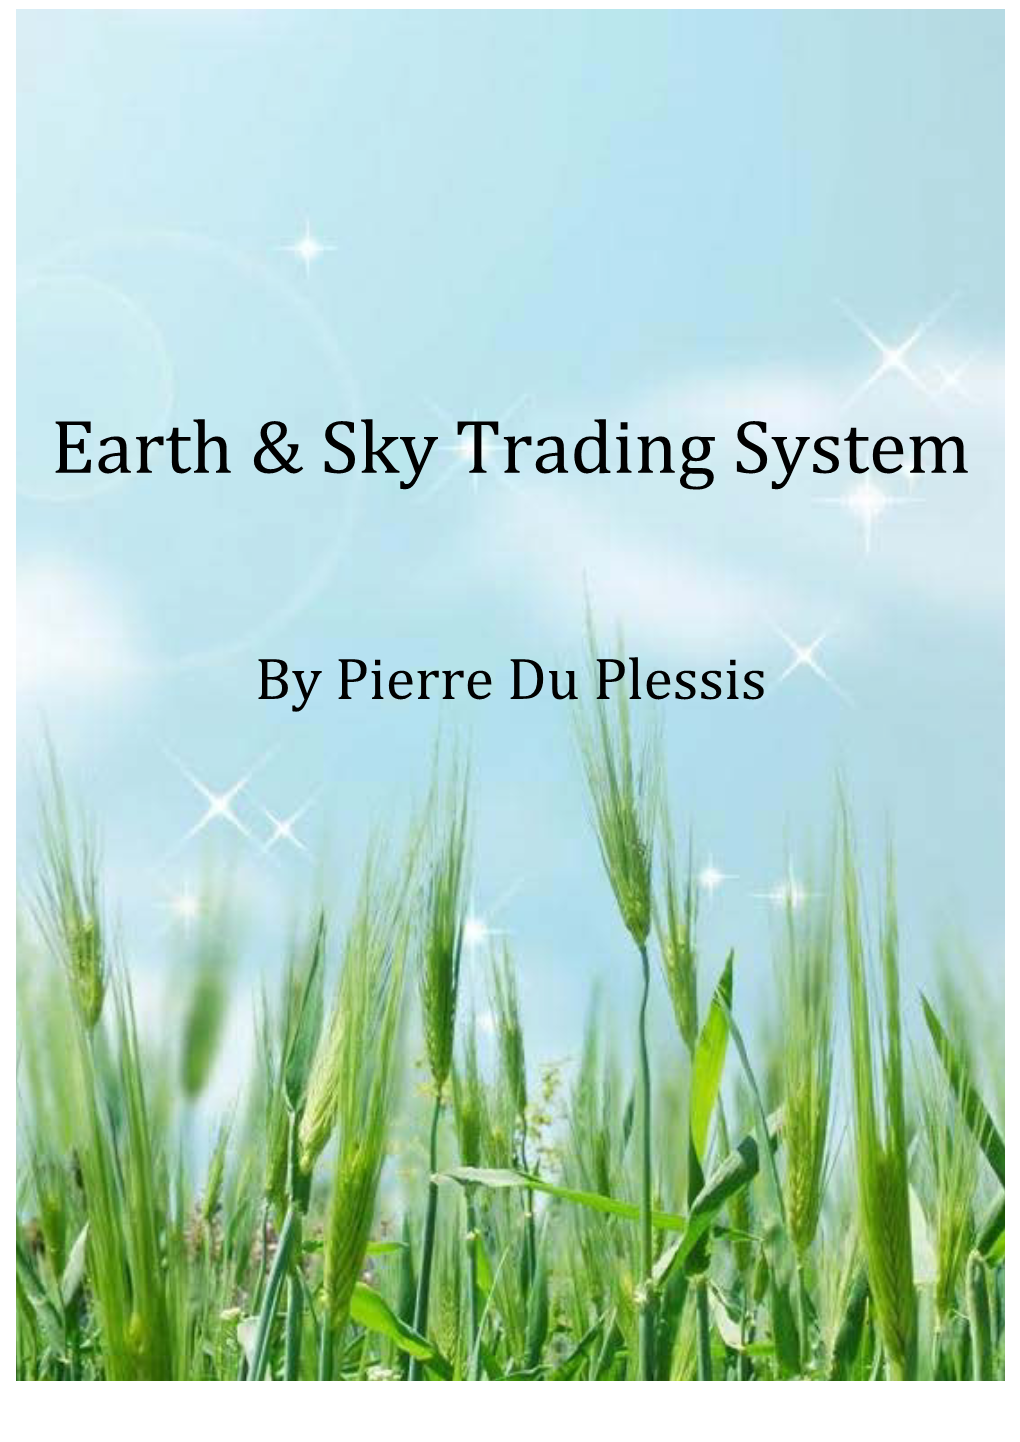 Earth & Sky Trading System